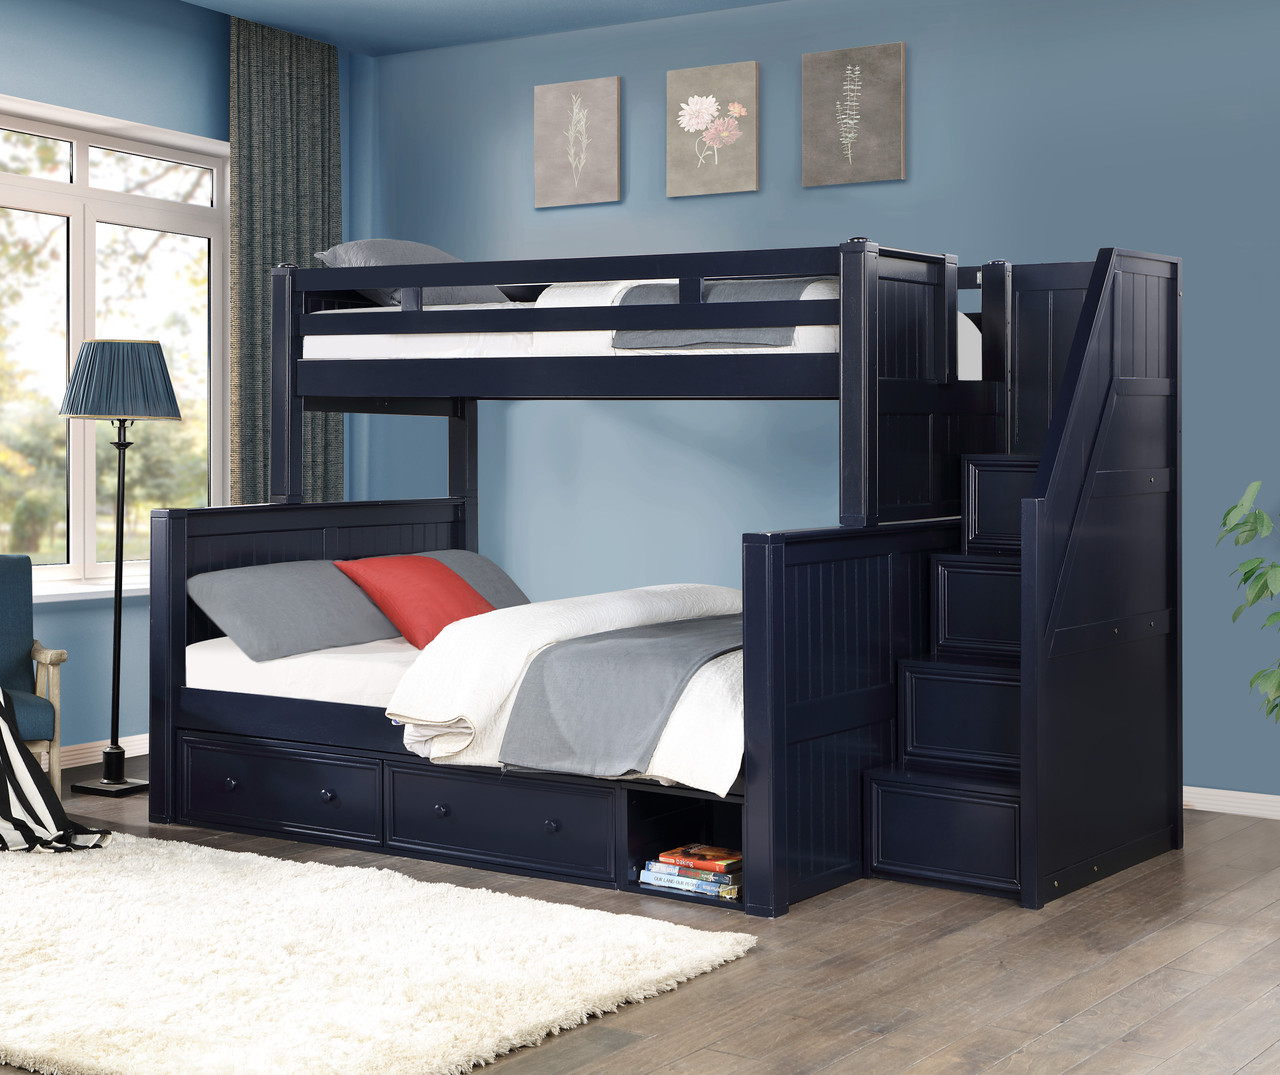 Twin XL over Queen Bunk Bed with Storage Drawers